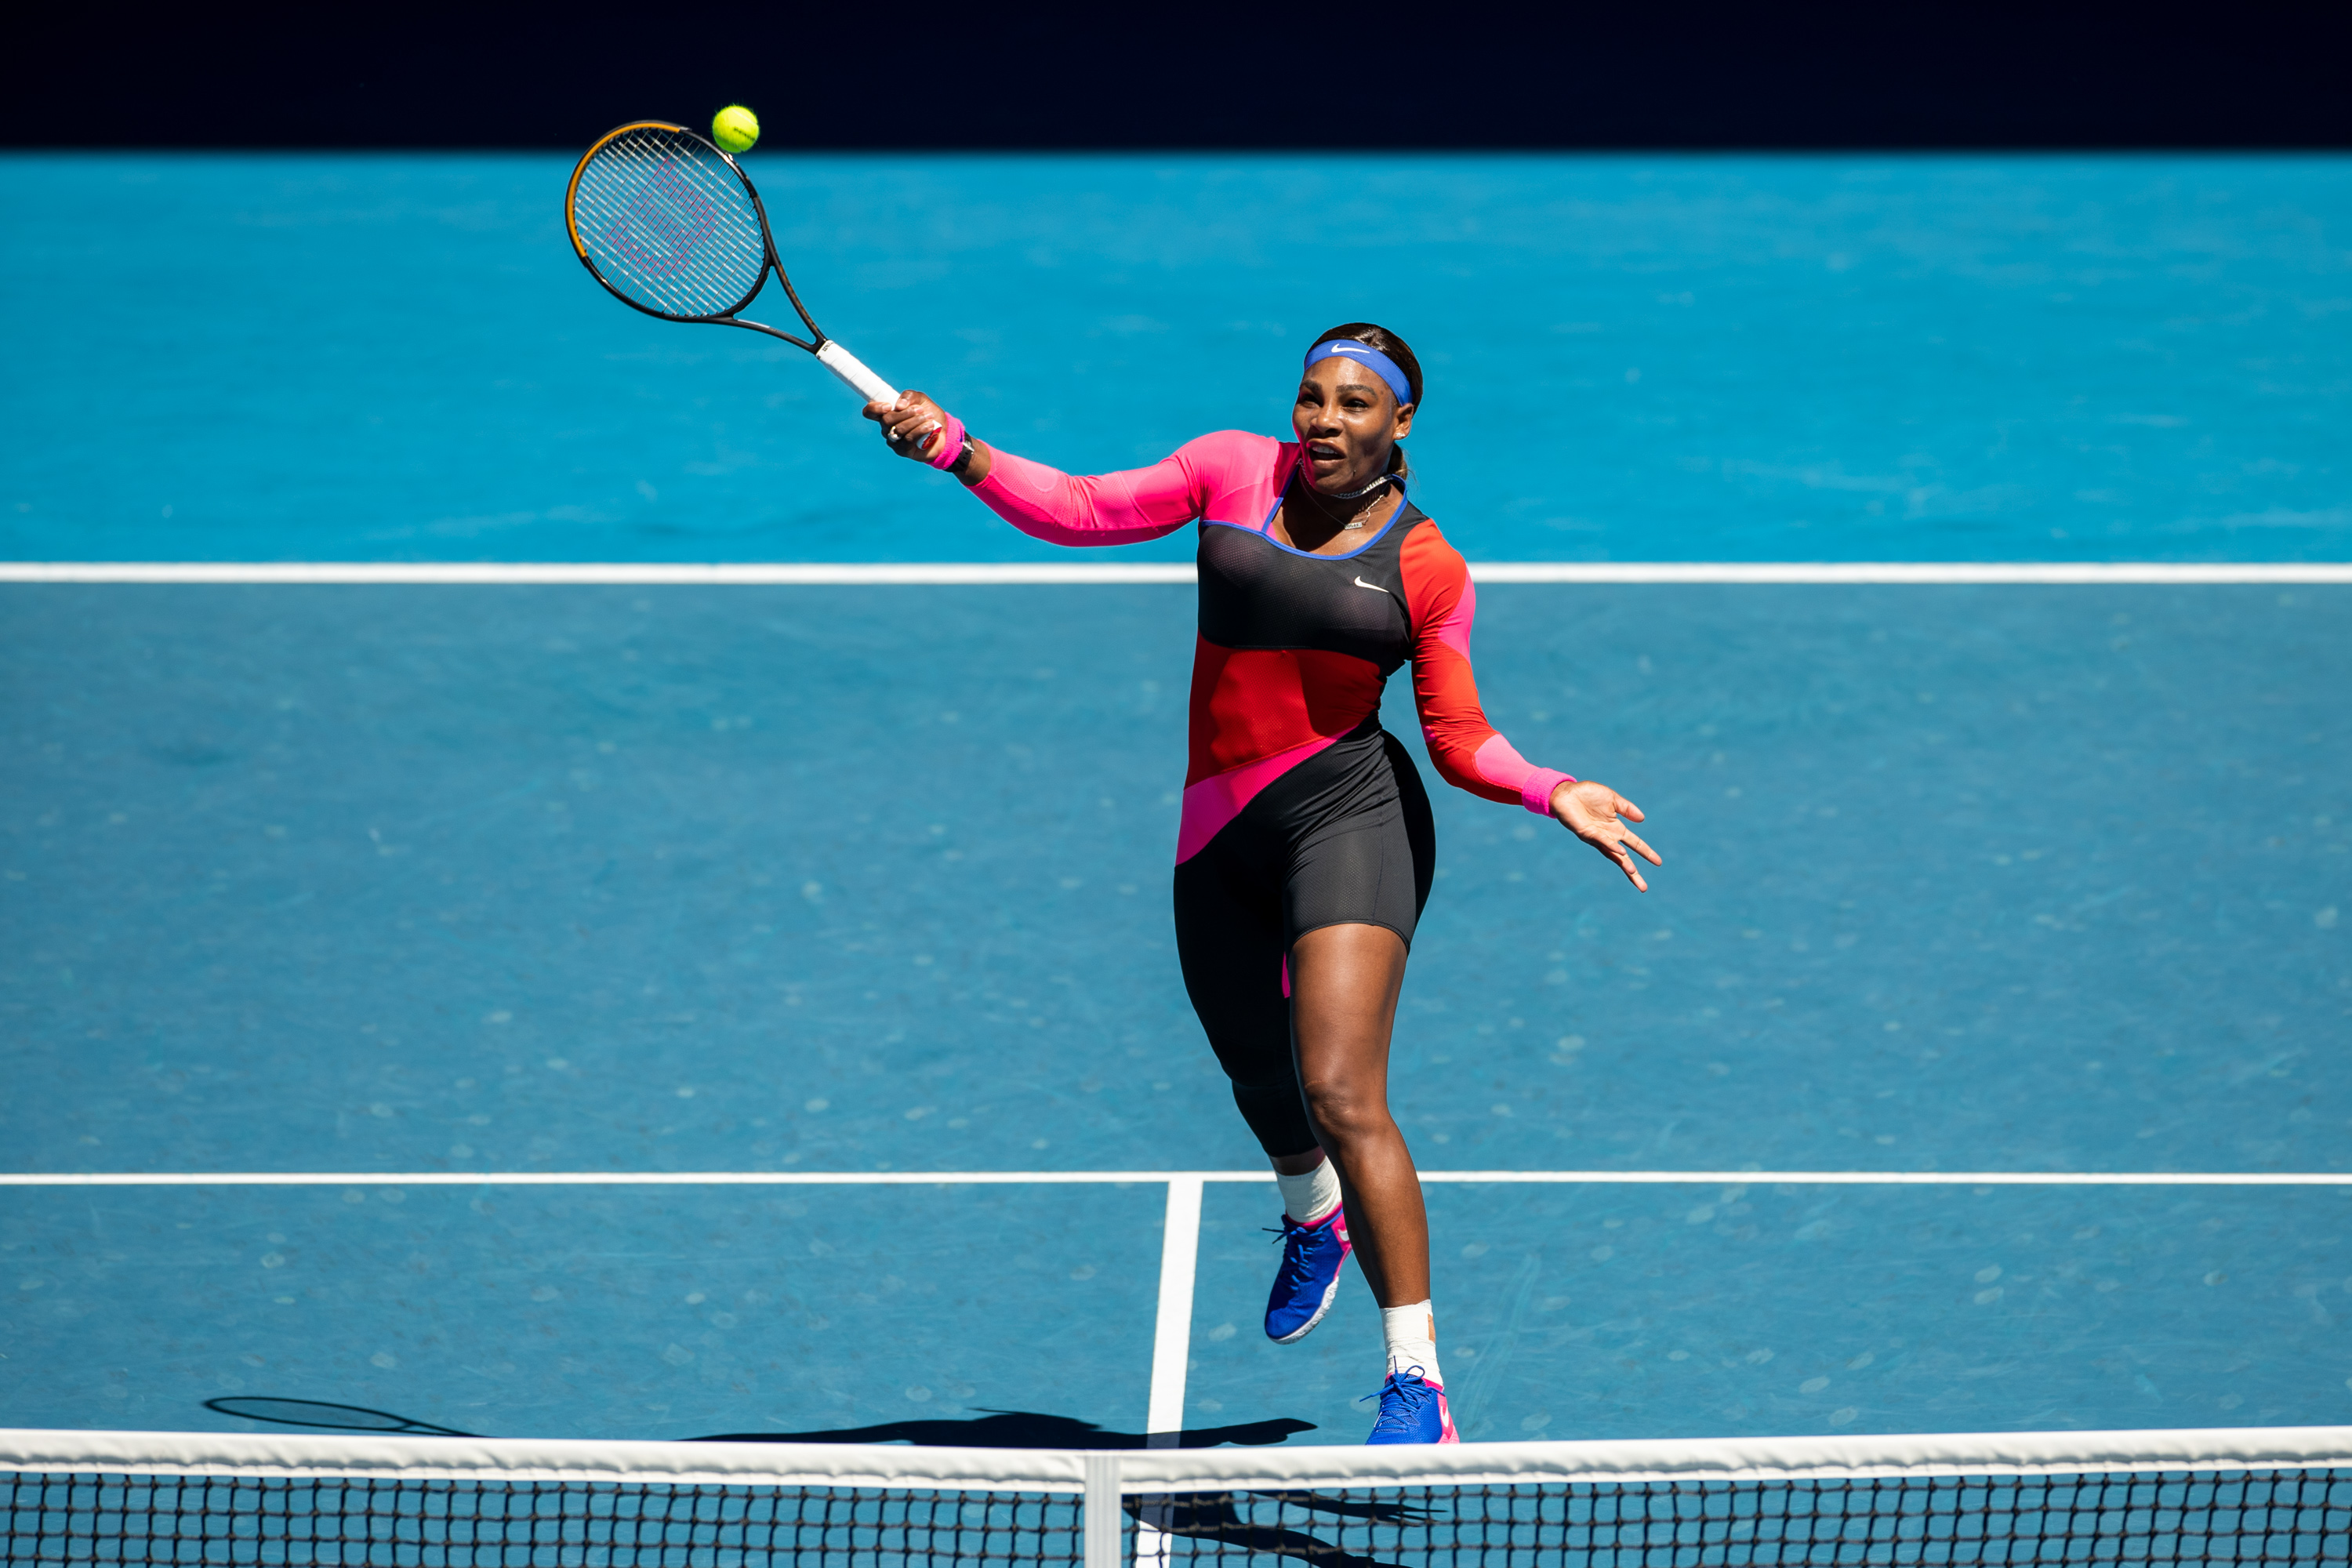 Serena Williams was stunned by a gift from Michael Jordan in 2017.